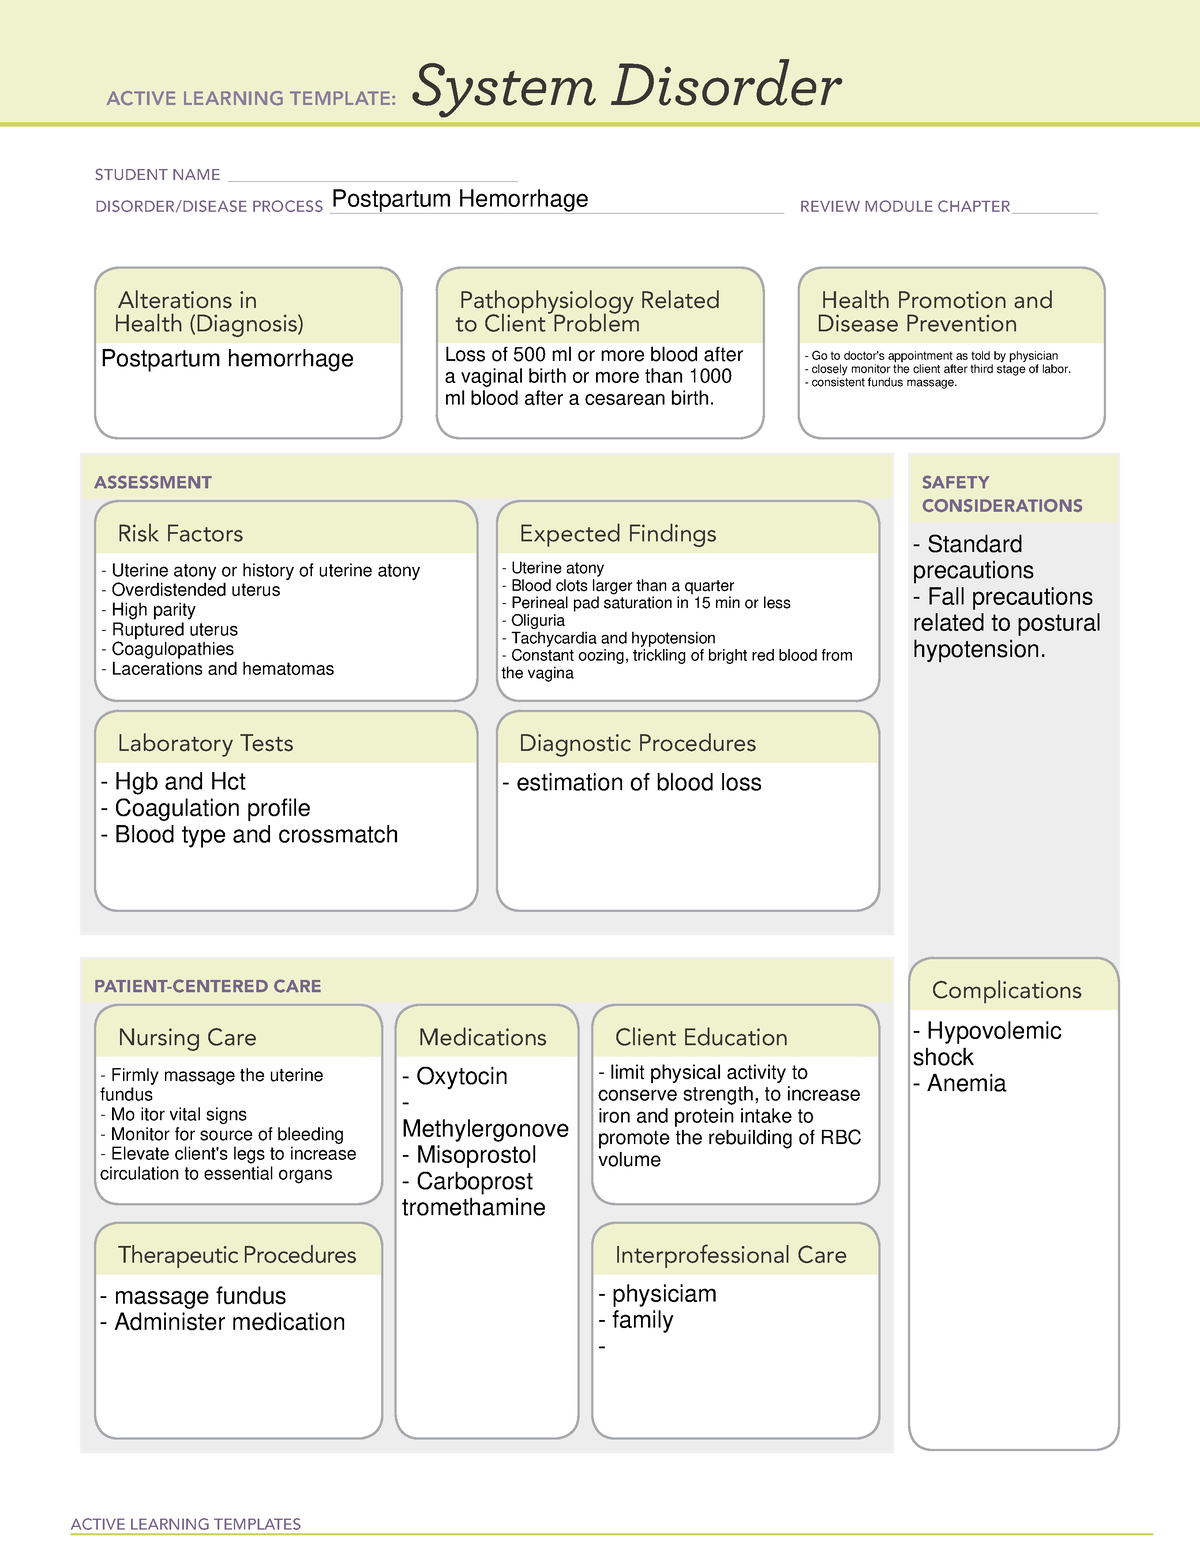 DP SD # postpartum hemorrhage - ACTIVE LEARNING TEMPLATES System ...